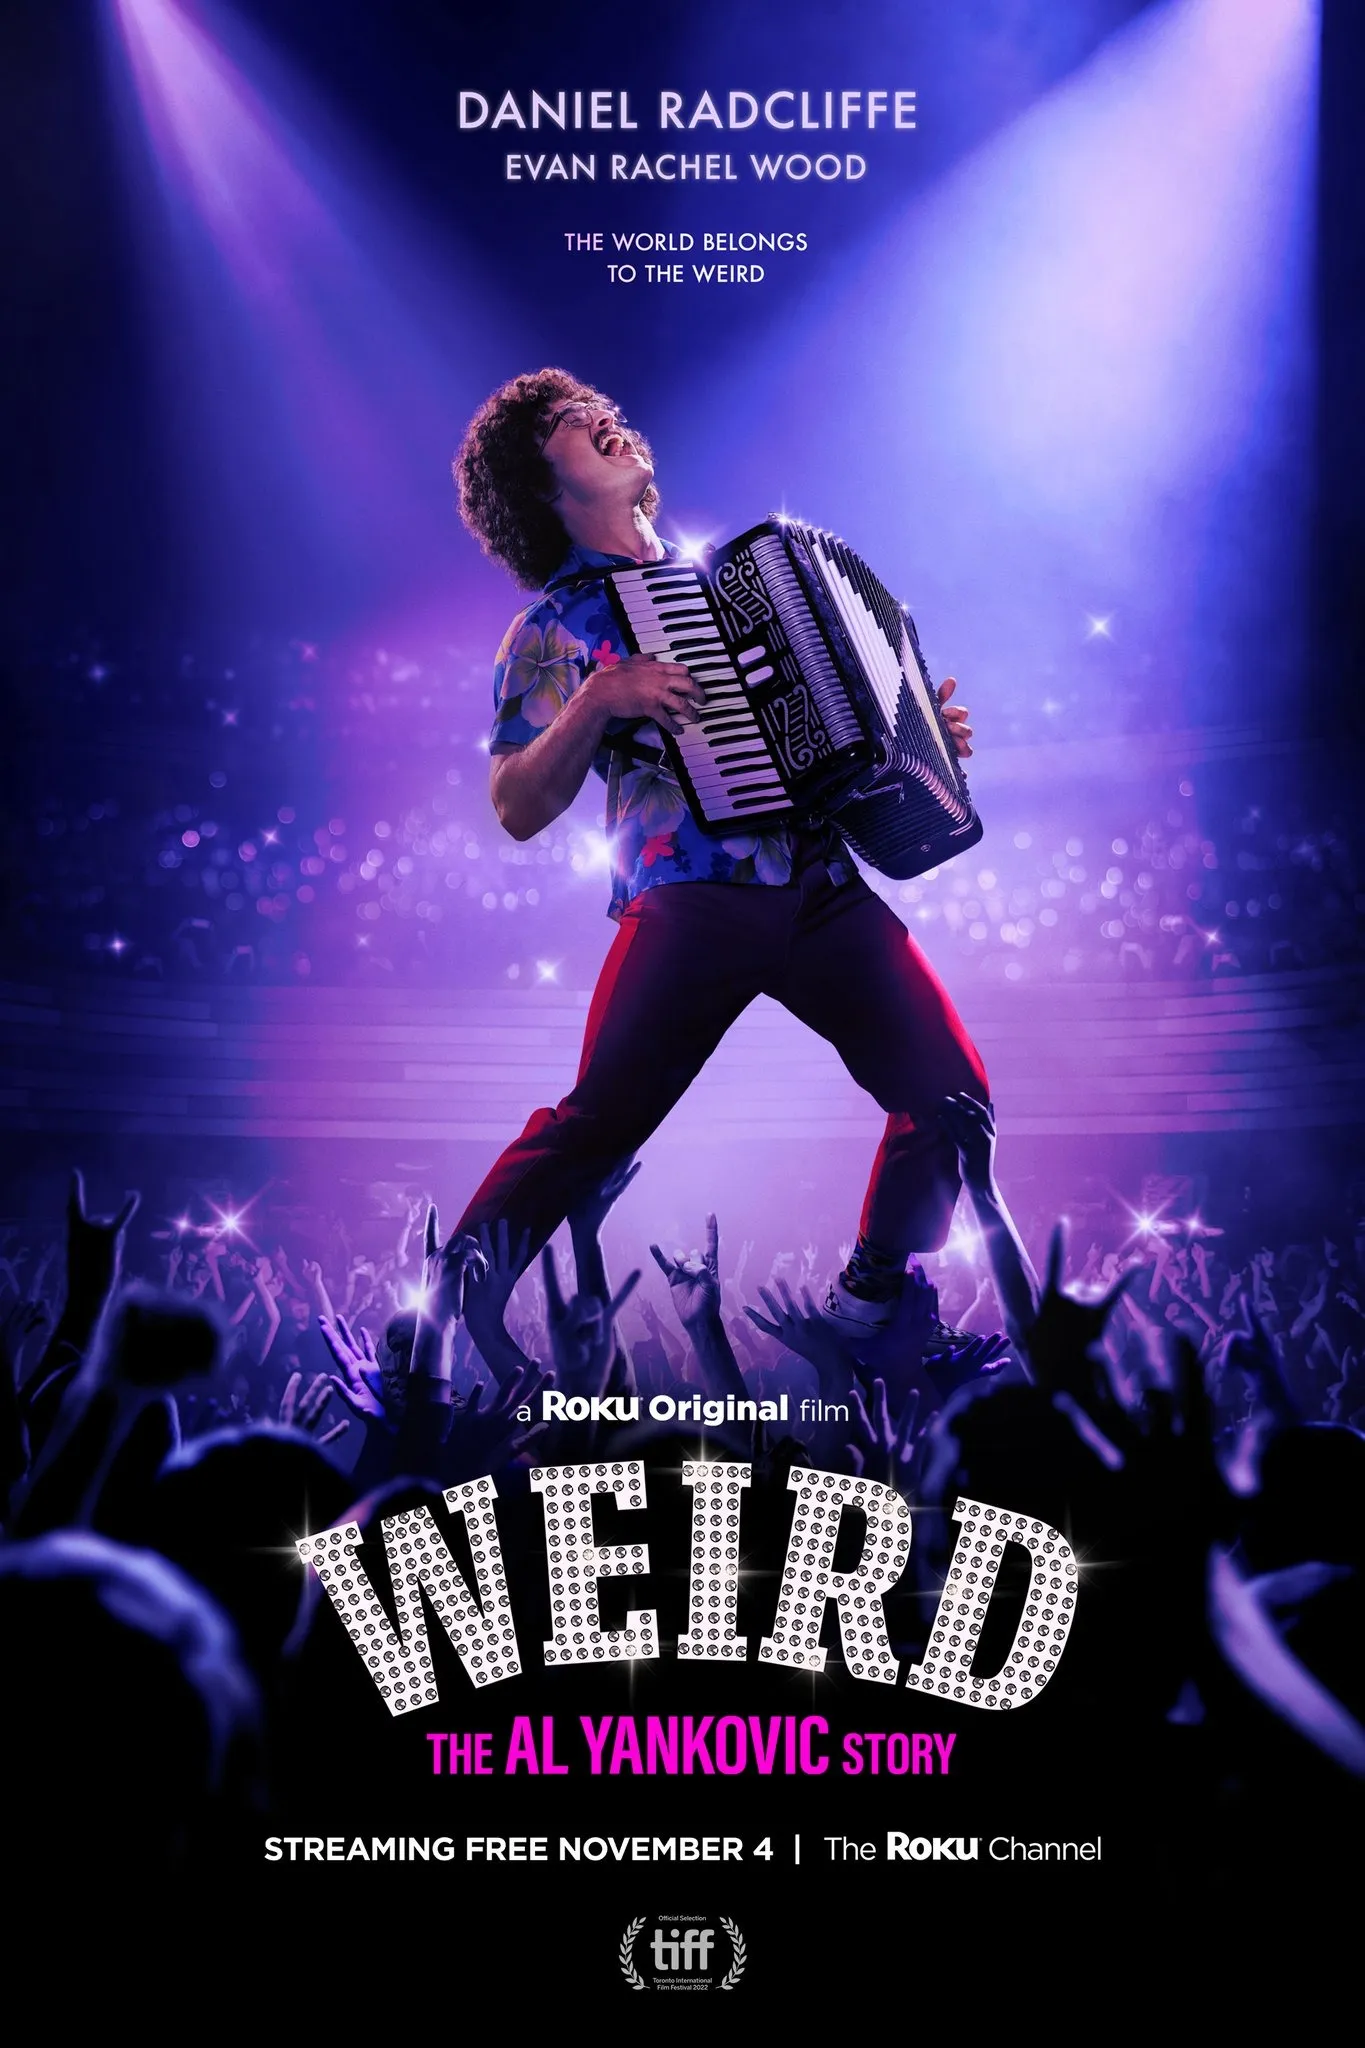 Daniel Radcliffe's new film 'Weird: The Al Yankovic Story' released Official Trailer, interpreting the life saga of spoof expert Yankovic | FMV6